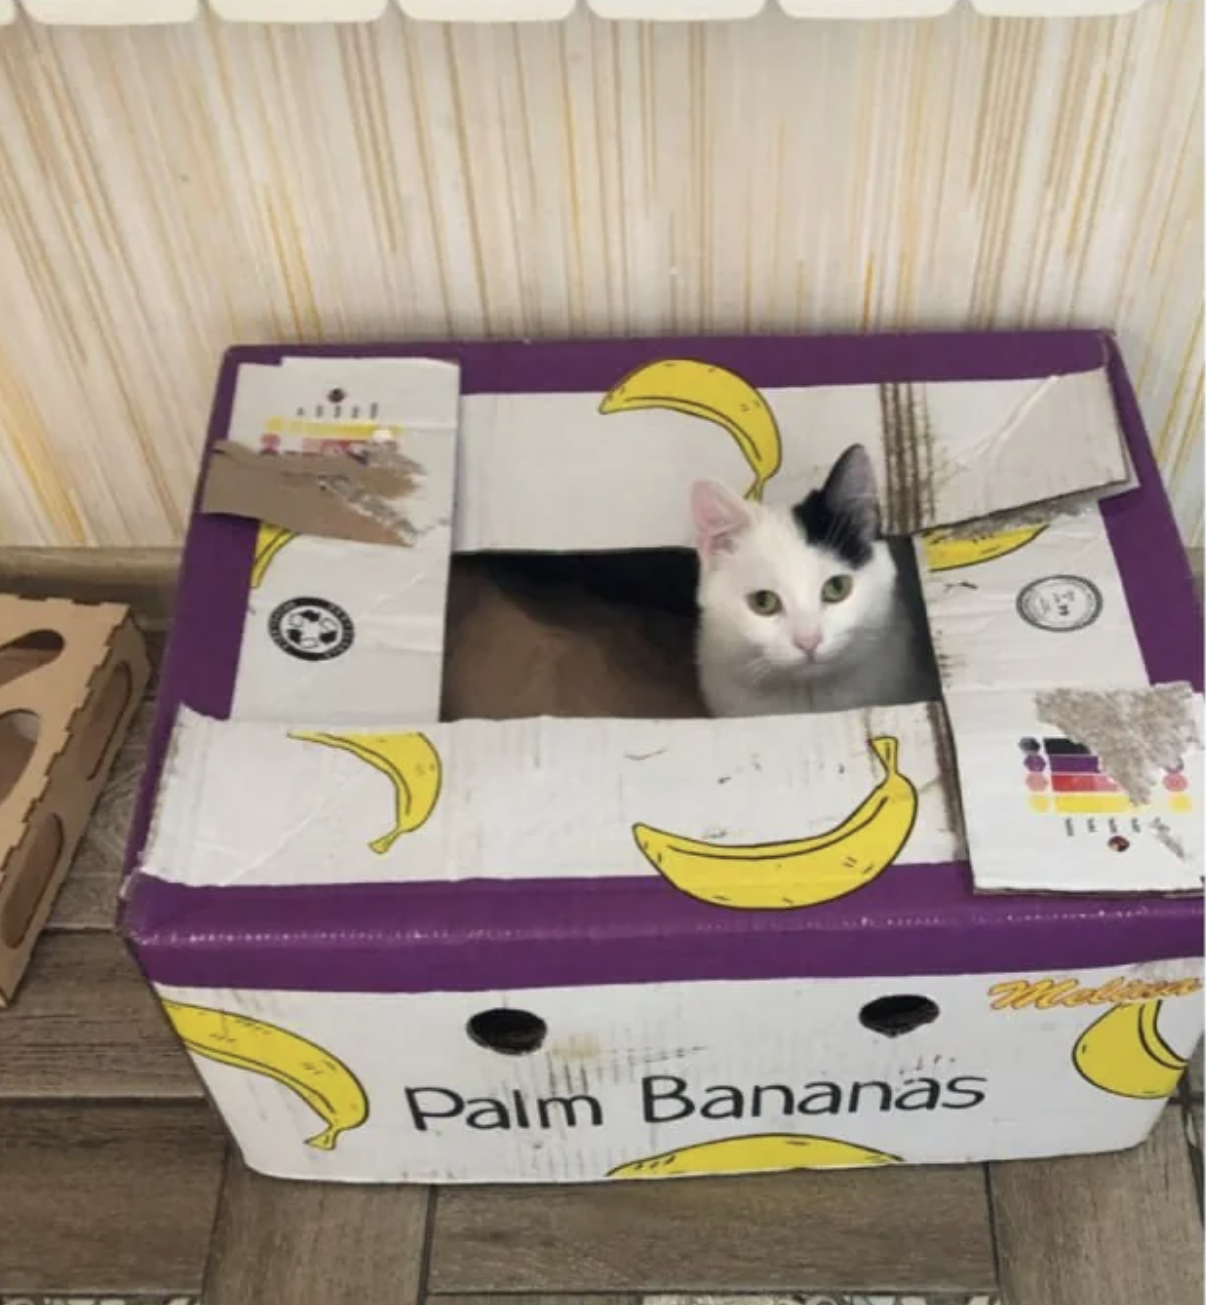 Cat peeking out from a homemade cardboard banana box house with cut-out windows